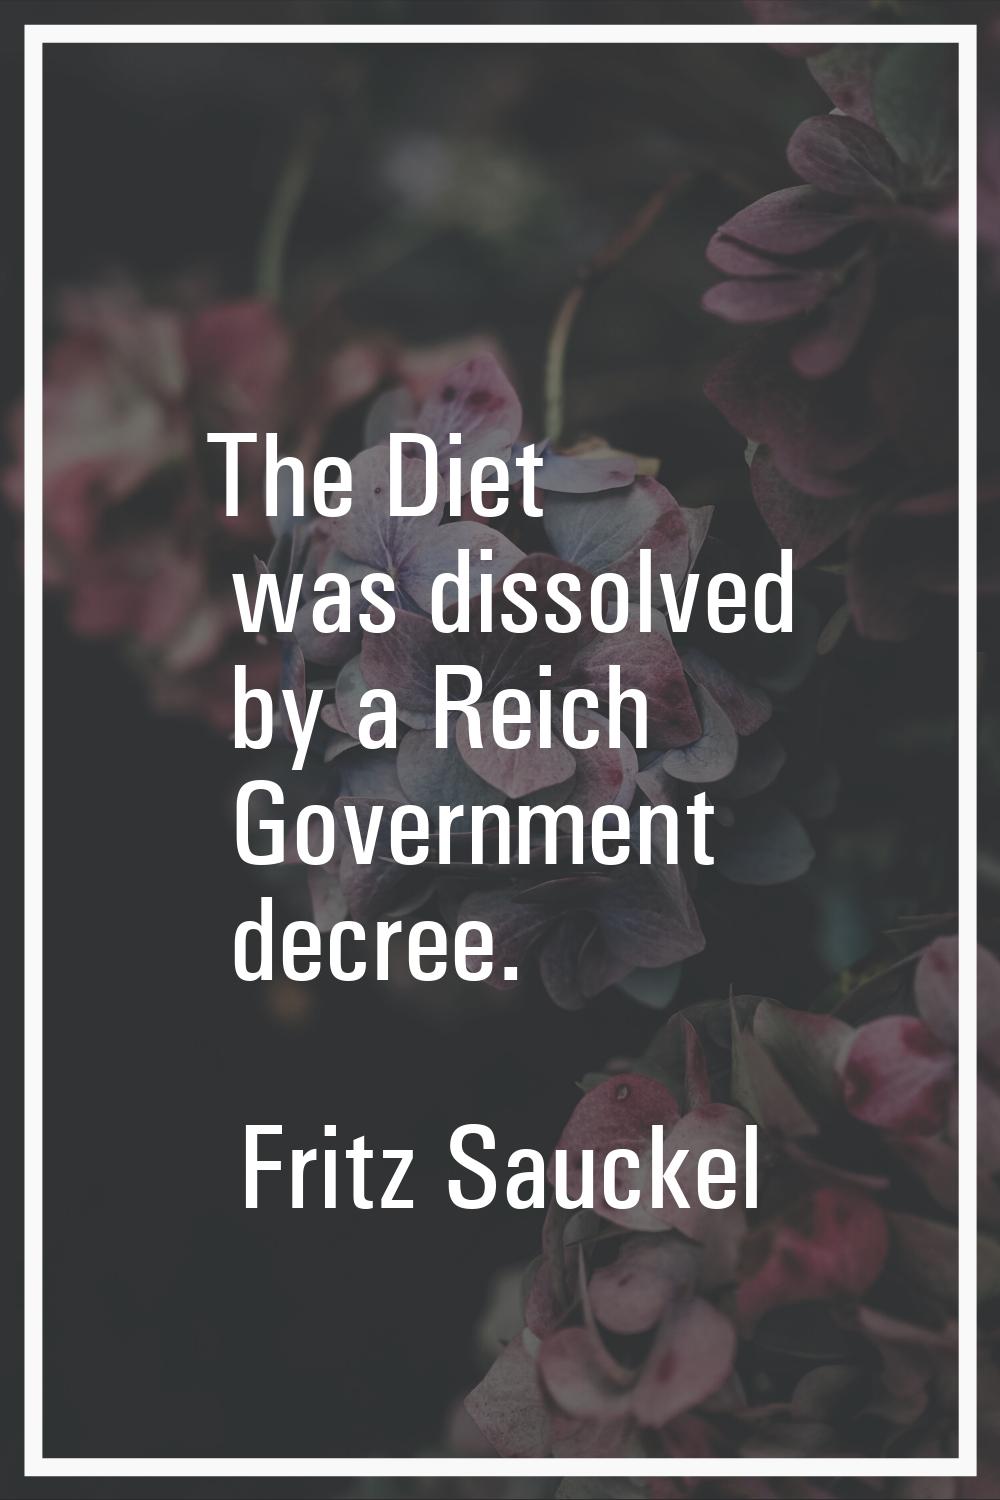 The Diet was dissolved by a Reich Government decree.